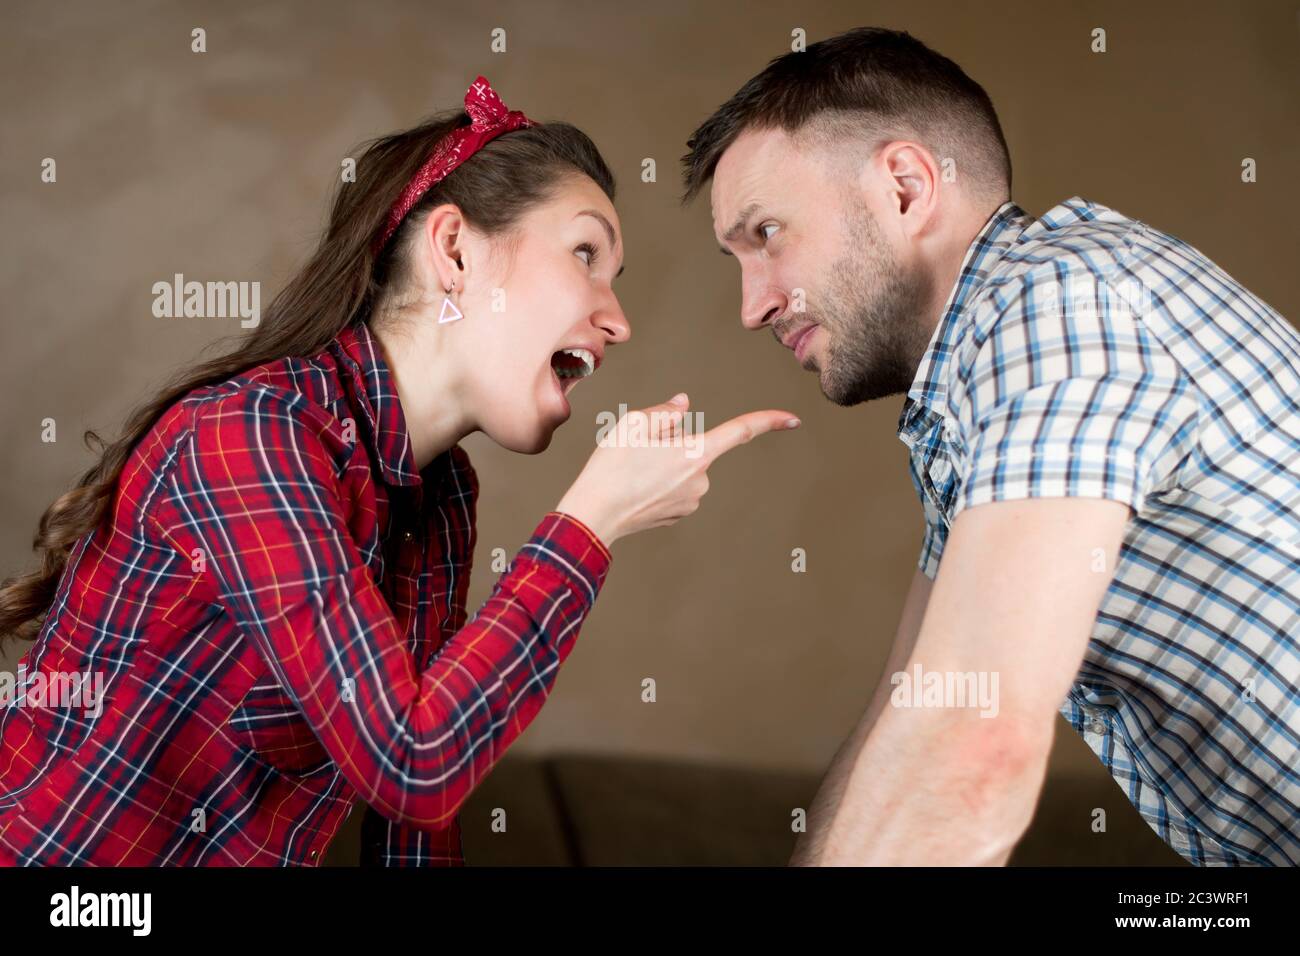 Husband and wife swear. Wife chastises husband for something, pointing finger Stock Photo